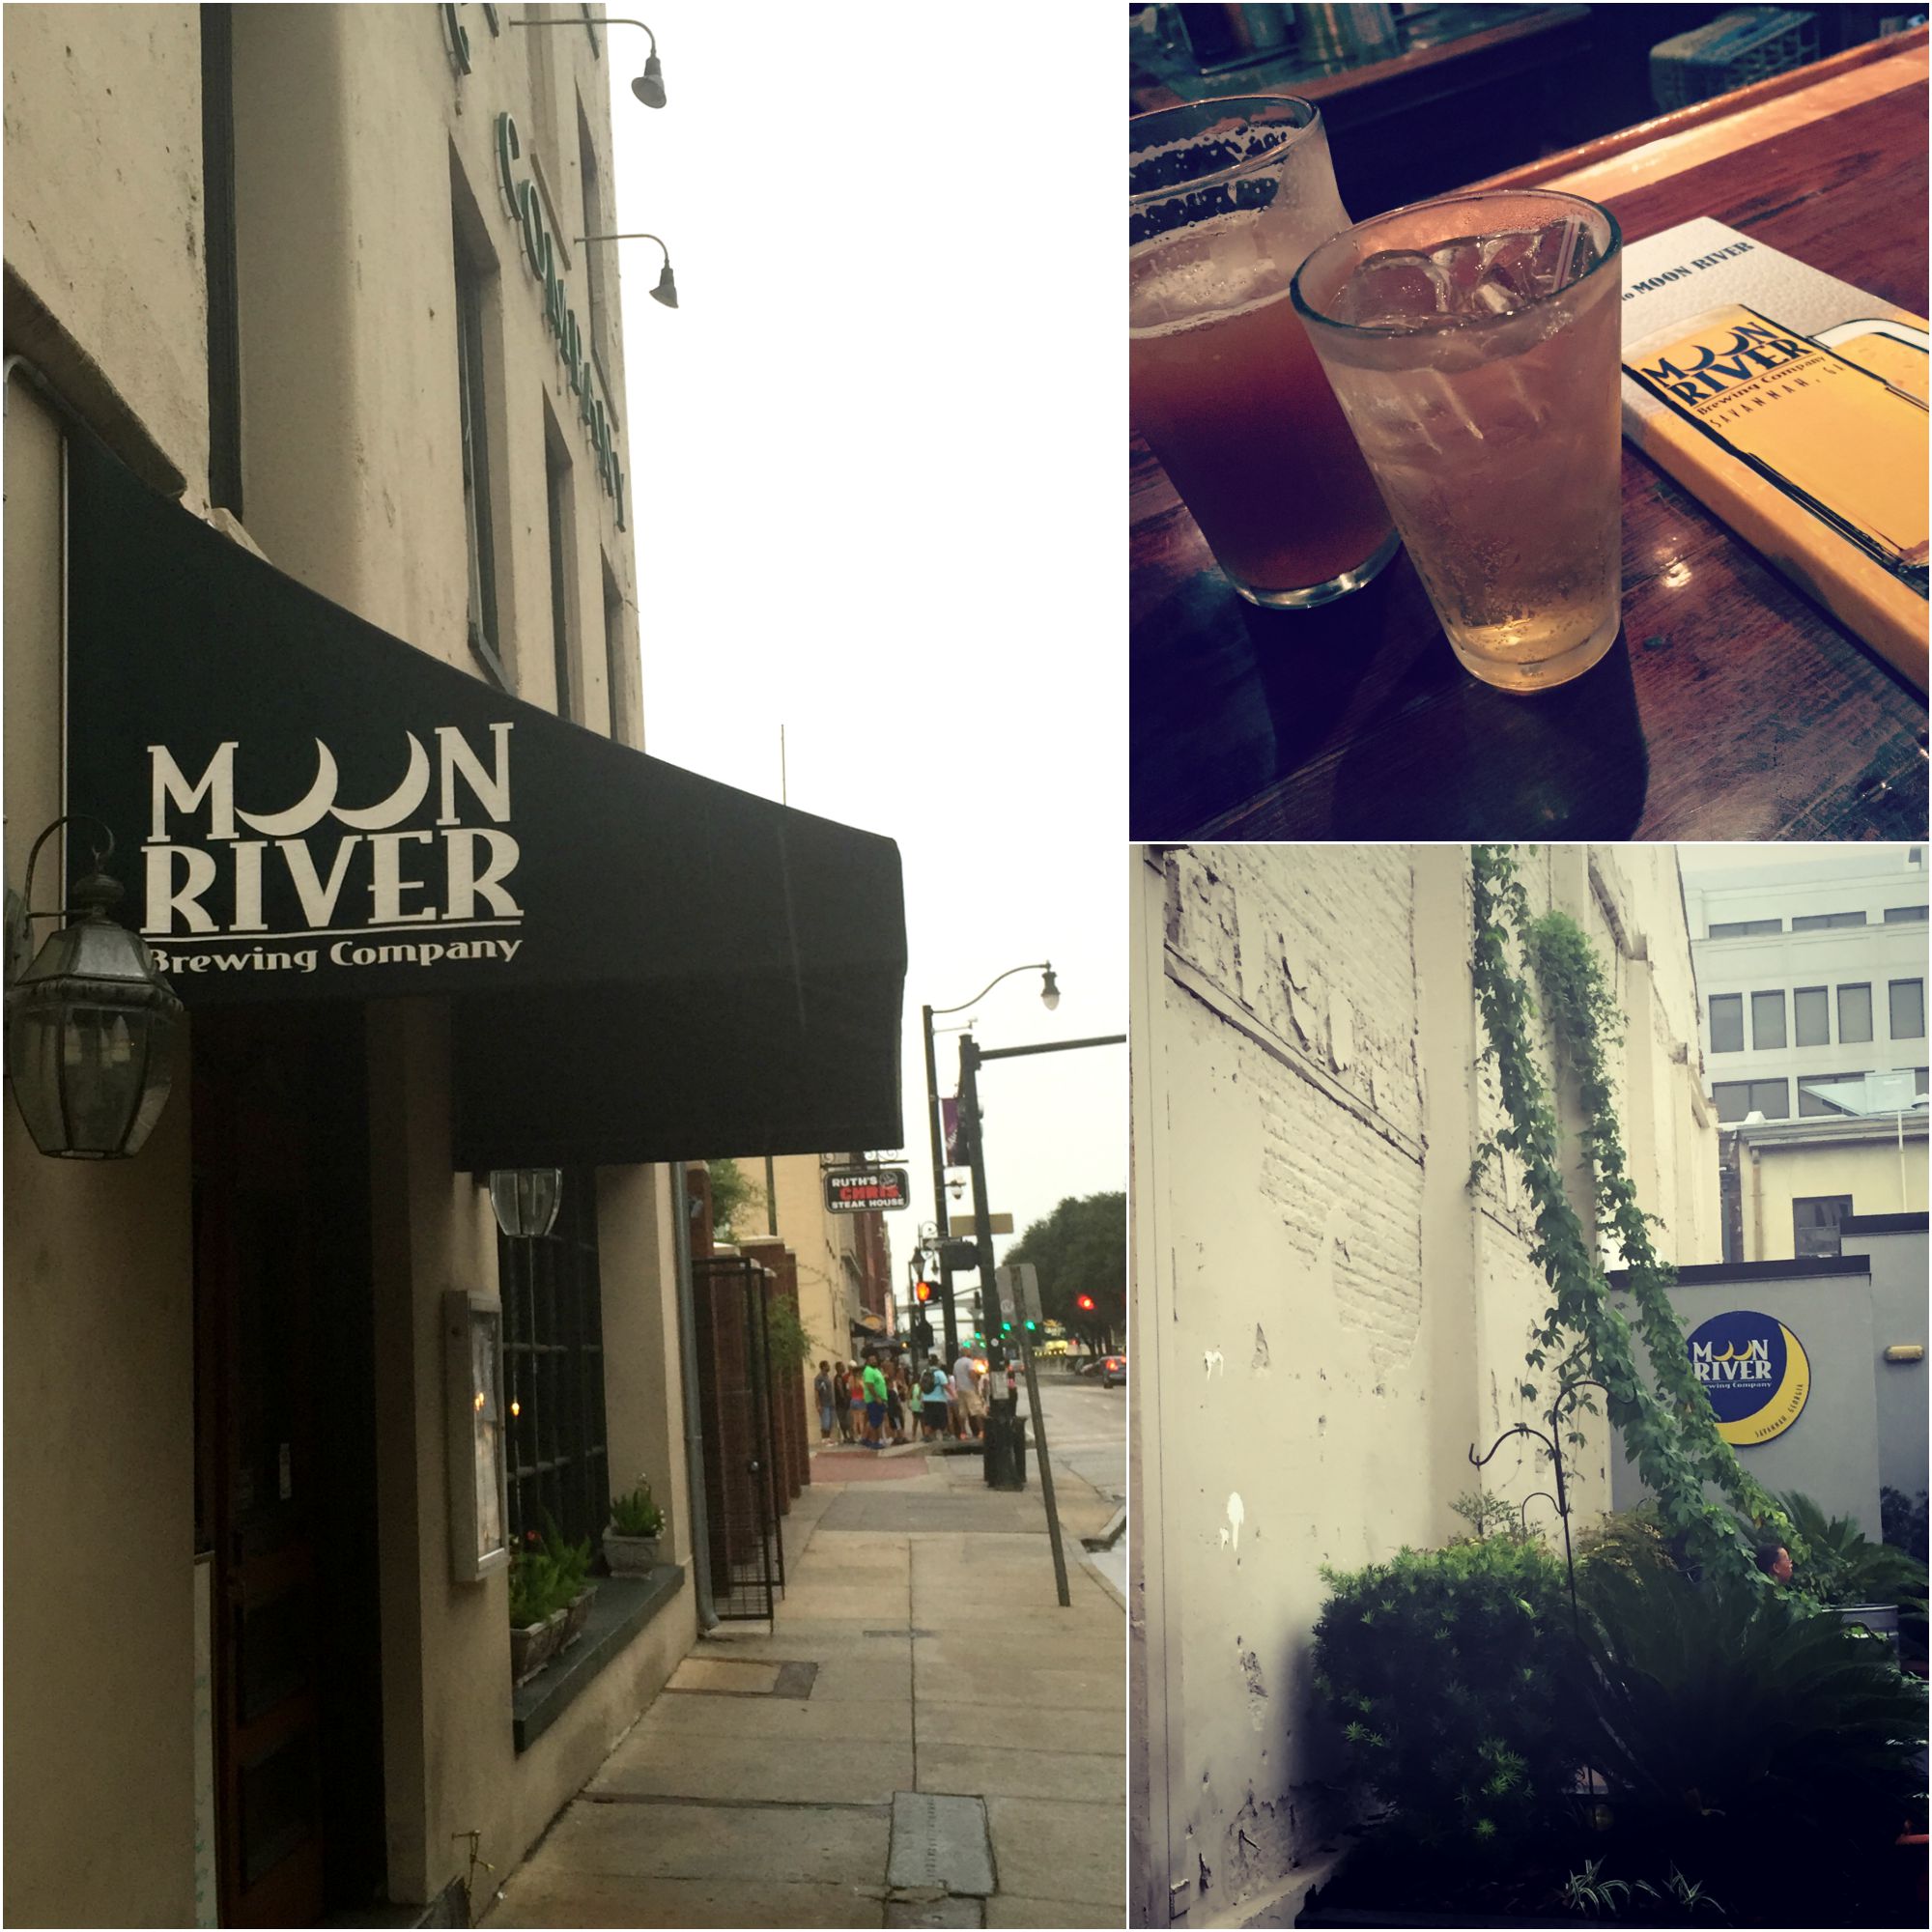 Moon River Brewing Co - Savannah GA - This is our Bliss